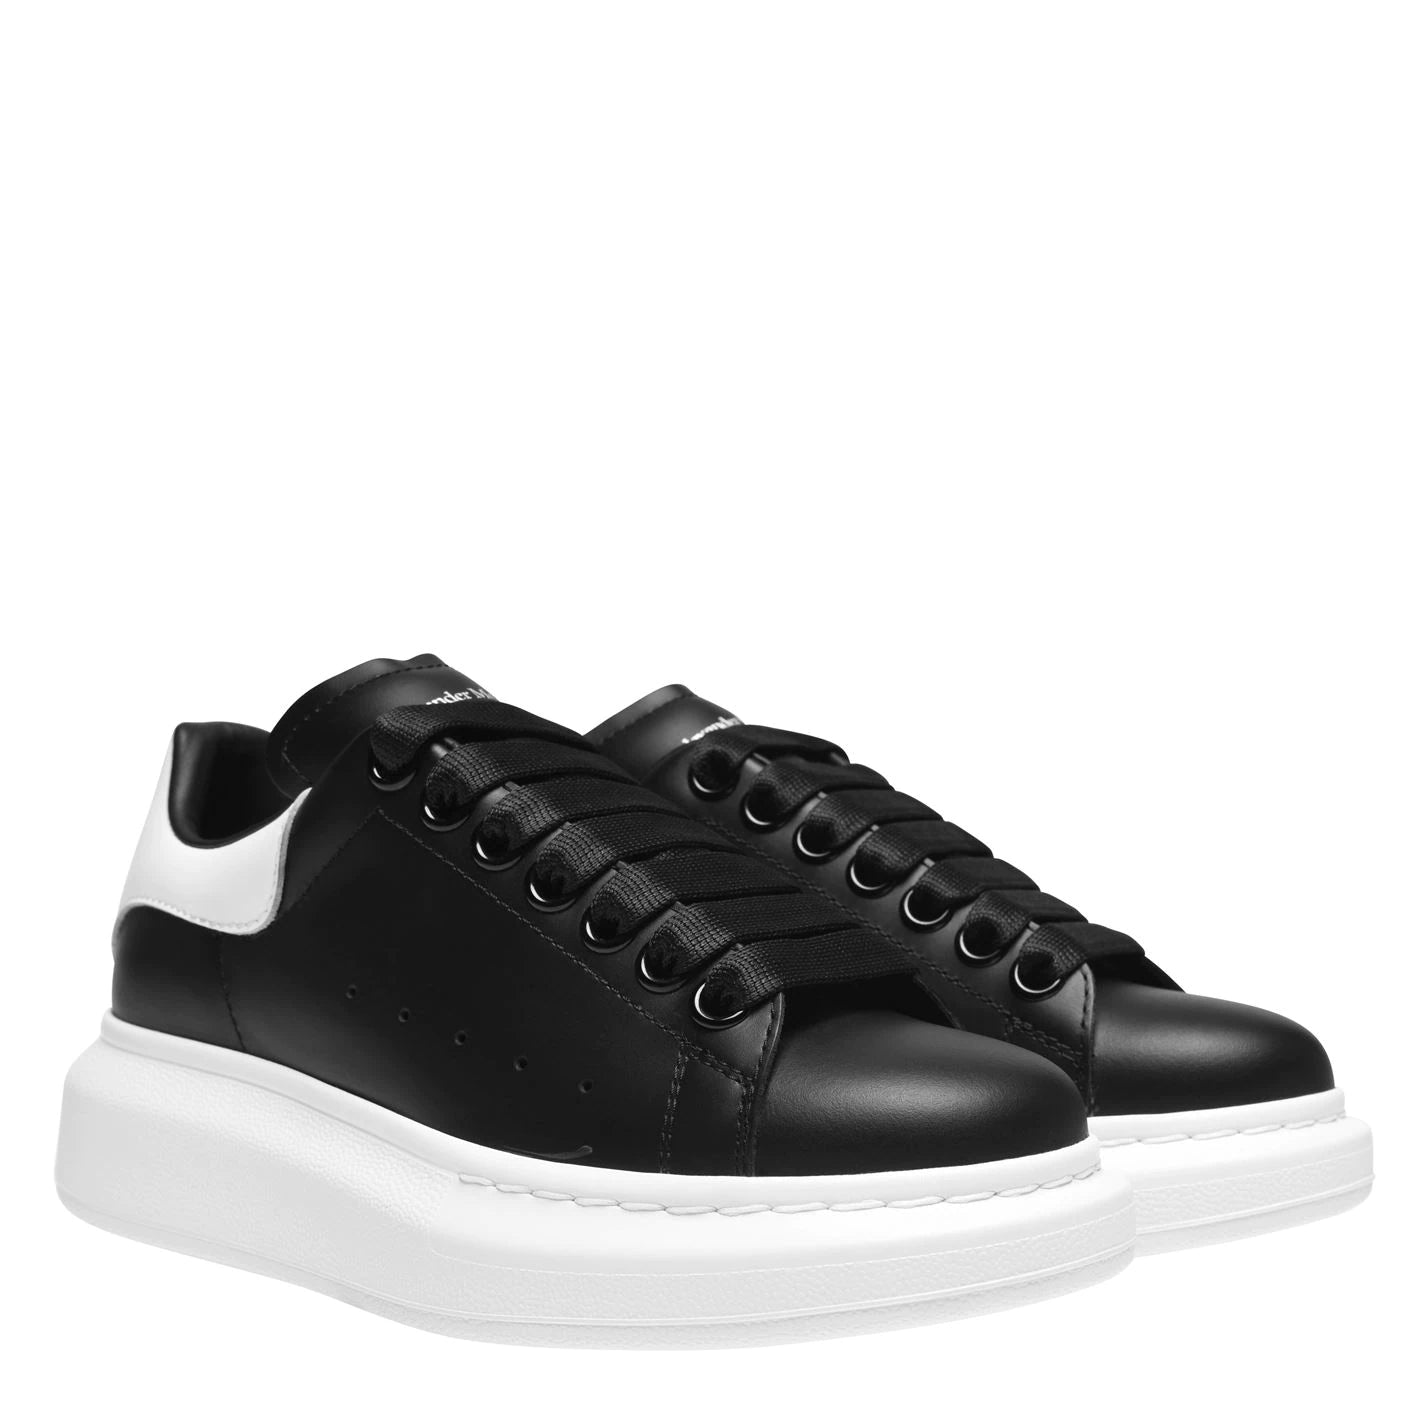 Double Boxed  419.99 Alexander McQueen Oversized Black White Tab Women's Double Boxed